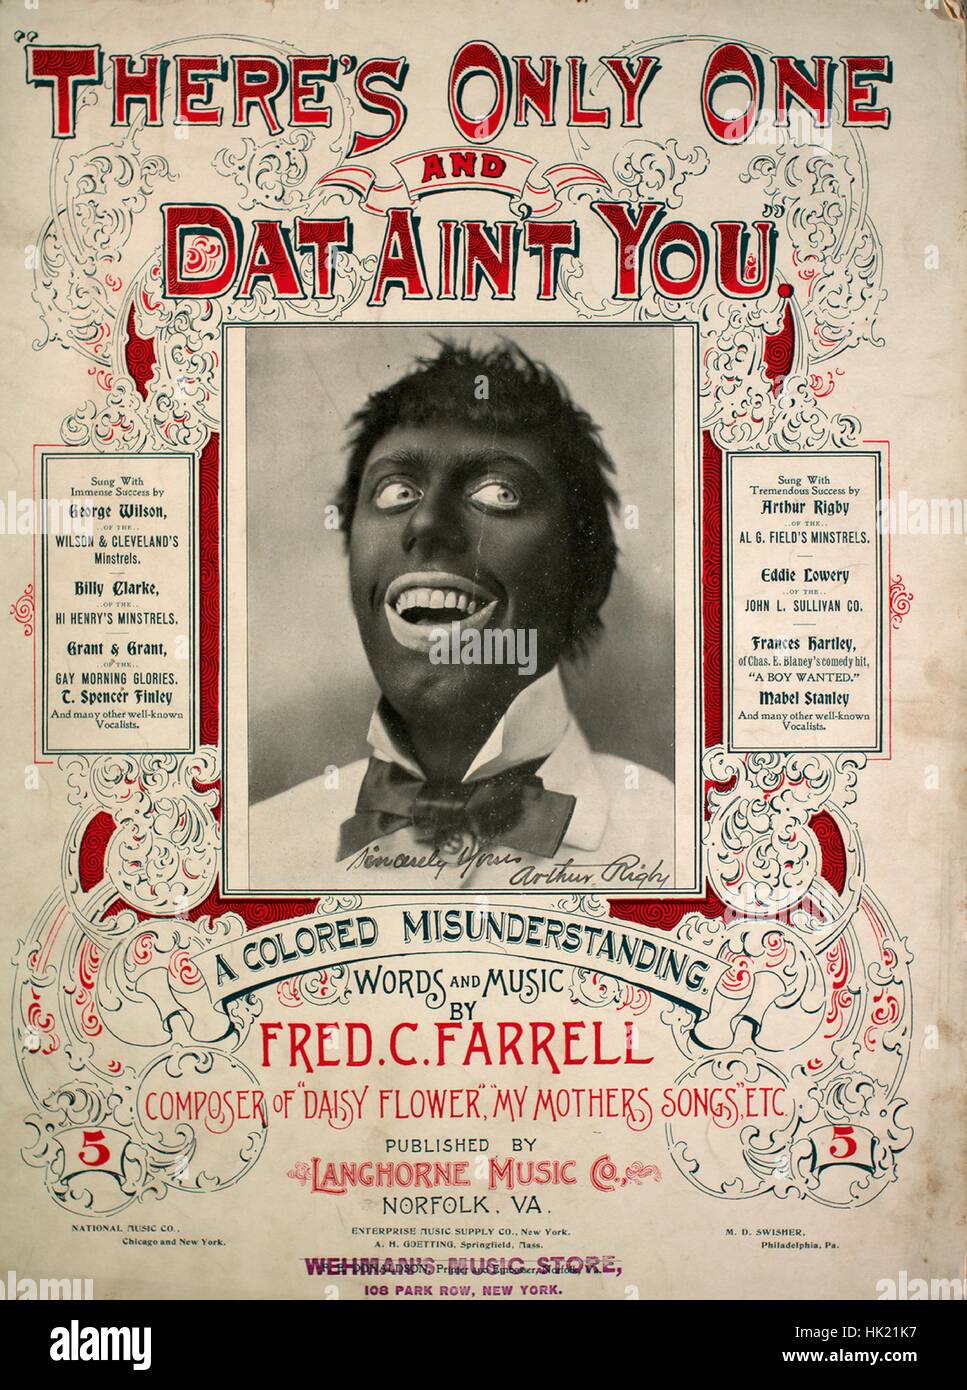 Sheet music cover image of the song 'There's Only One and Dat Ain't You A Colored Misunderstanding', with original authorship notes reading 'Words and Music by Fred C Farrell', 1898. The publisher is listed as 'Langhorne Music Co.', the form of composition is 'strophic with chorus', the instrumentation is 'piano and voice', the first line reads 'I fell I love with the prettiest little yaller gal', and the illustration artist is listed as 'unattrib. photo of Arthur Rigby; The Armstrong Co., Music Typographers, 710 Sansom St., Phila.'. Stock Photo